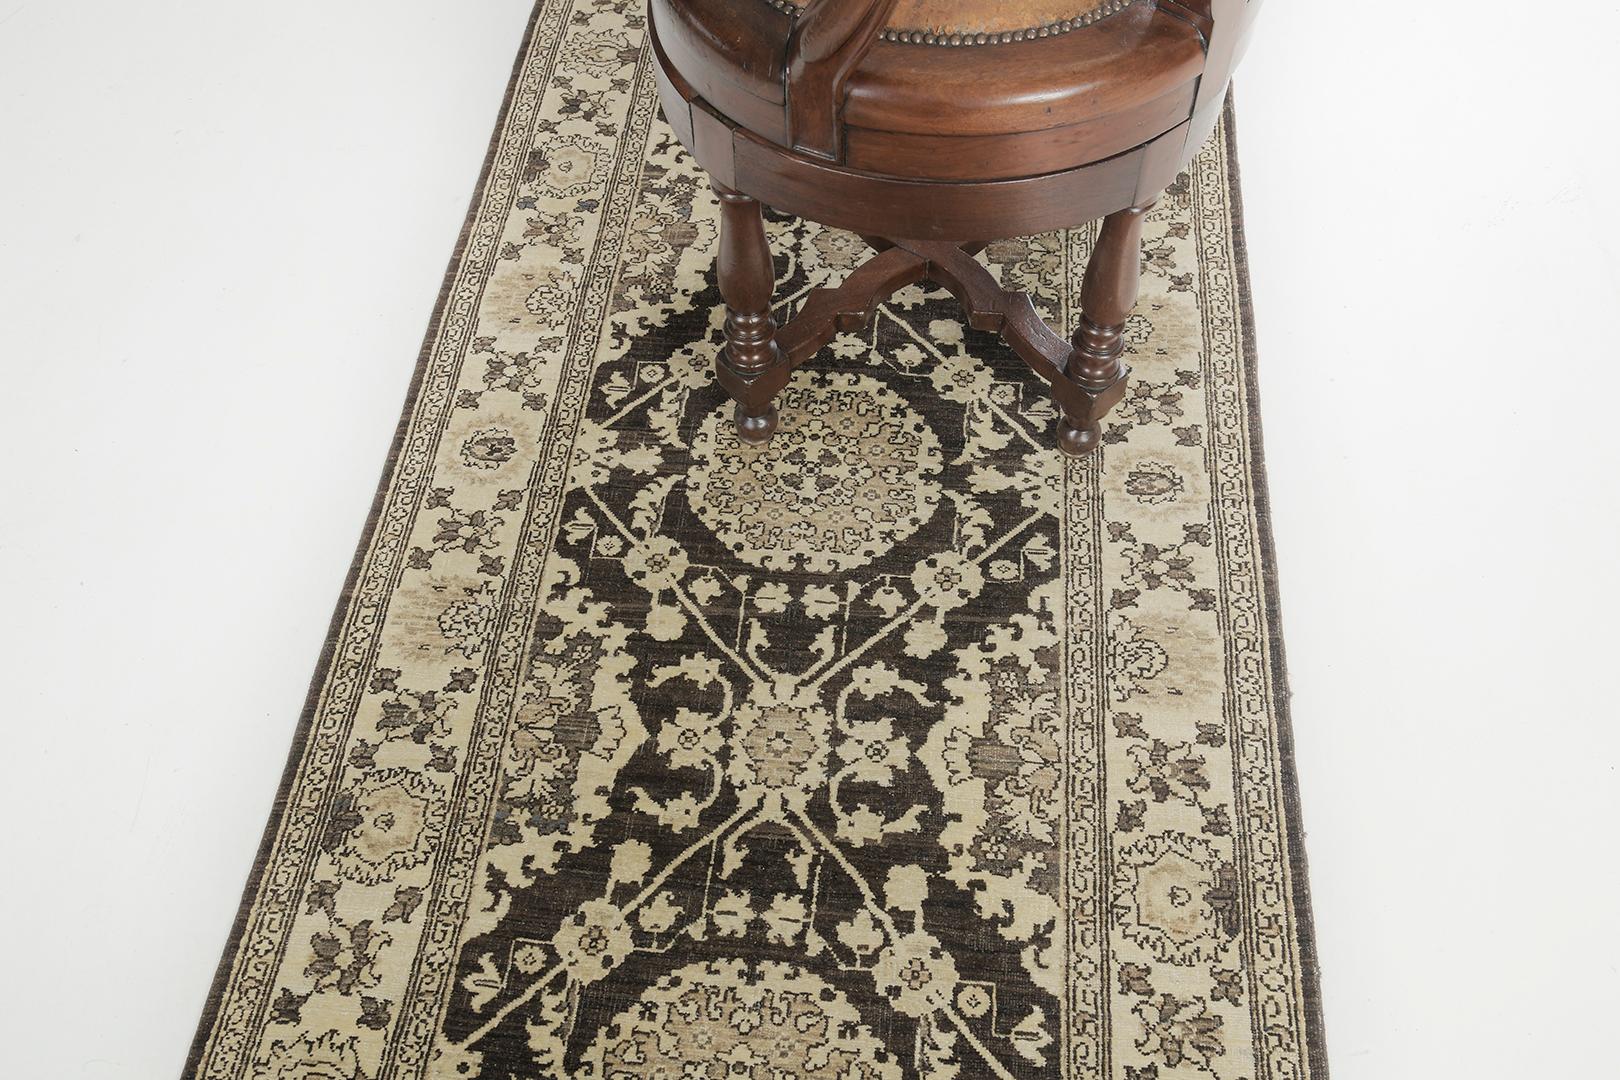 This glorious revival of the Mahal rug has created an amazing pattern. It features well-coordinated florid elements to neutral tone in mocha, umber brown, and cream accents. This elegant rug is embellished with enchanting symmetrical patterns in the